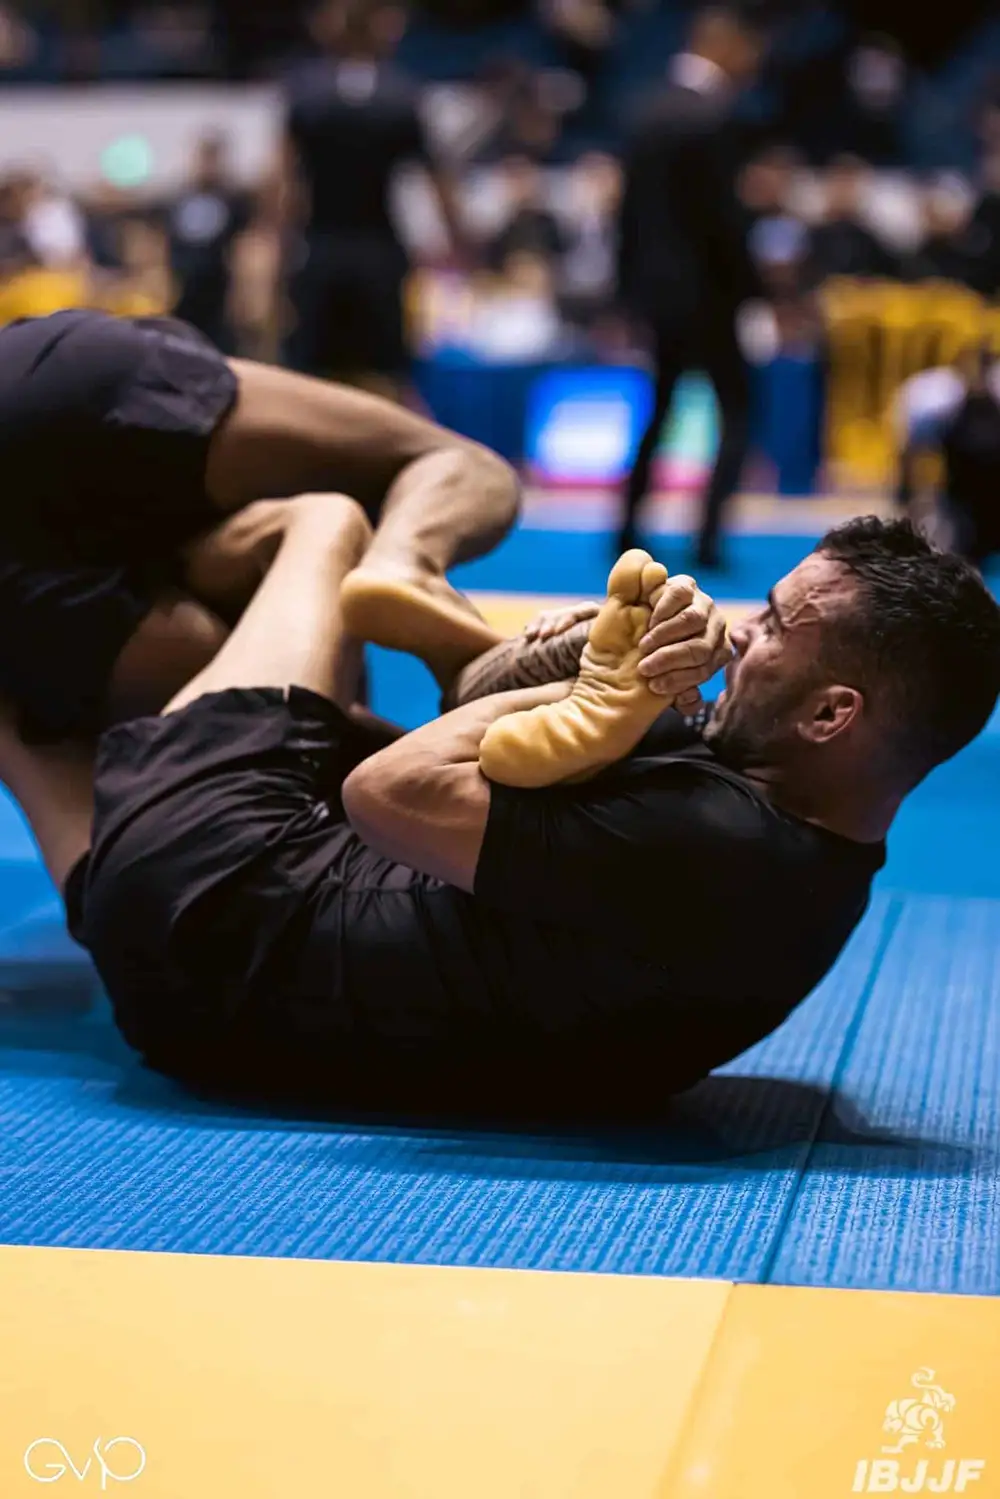 A student competing in no gi jiu jitsu for fitness at Raposo BJJ Academy in Slidell LA